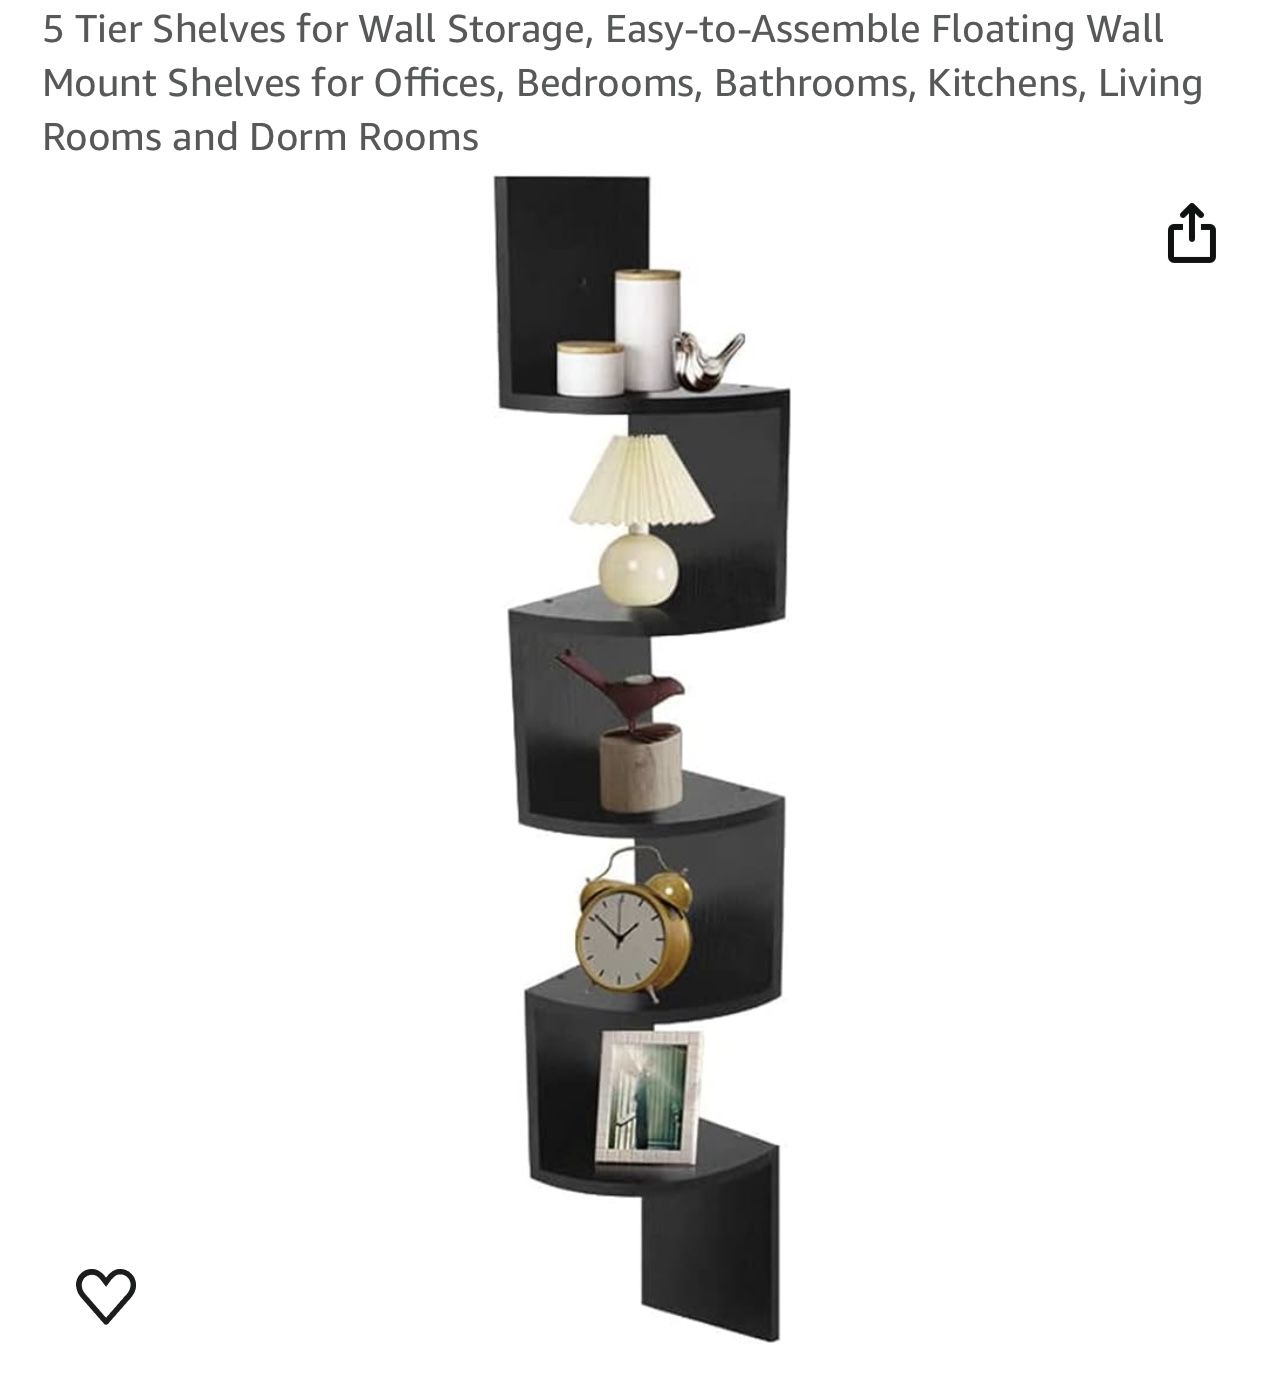 5 Tier Shelves for Wall Storage